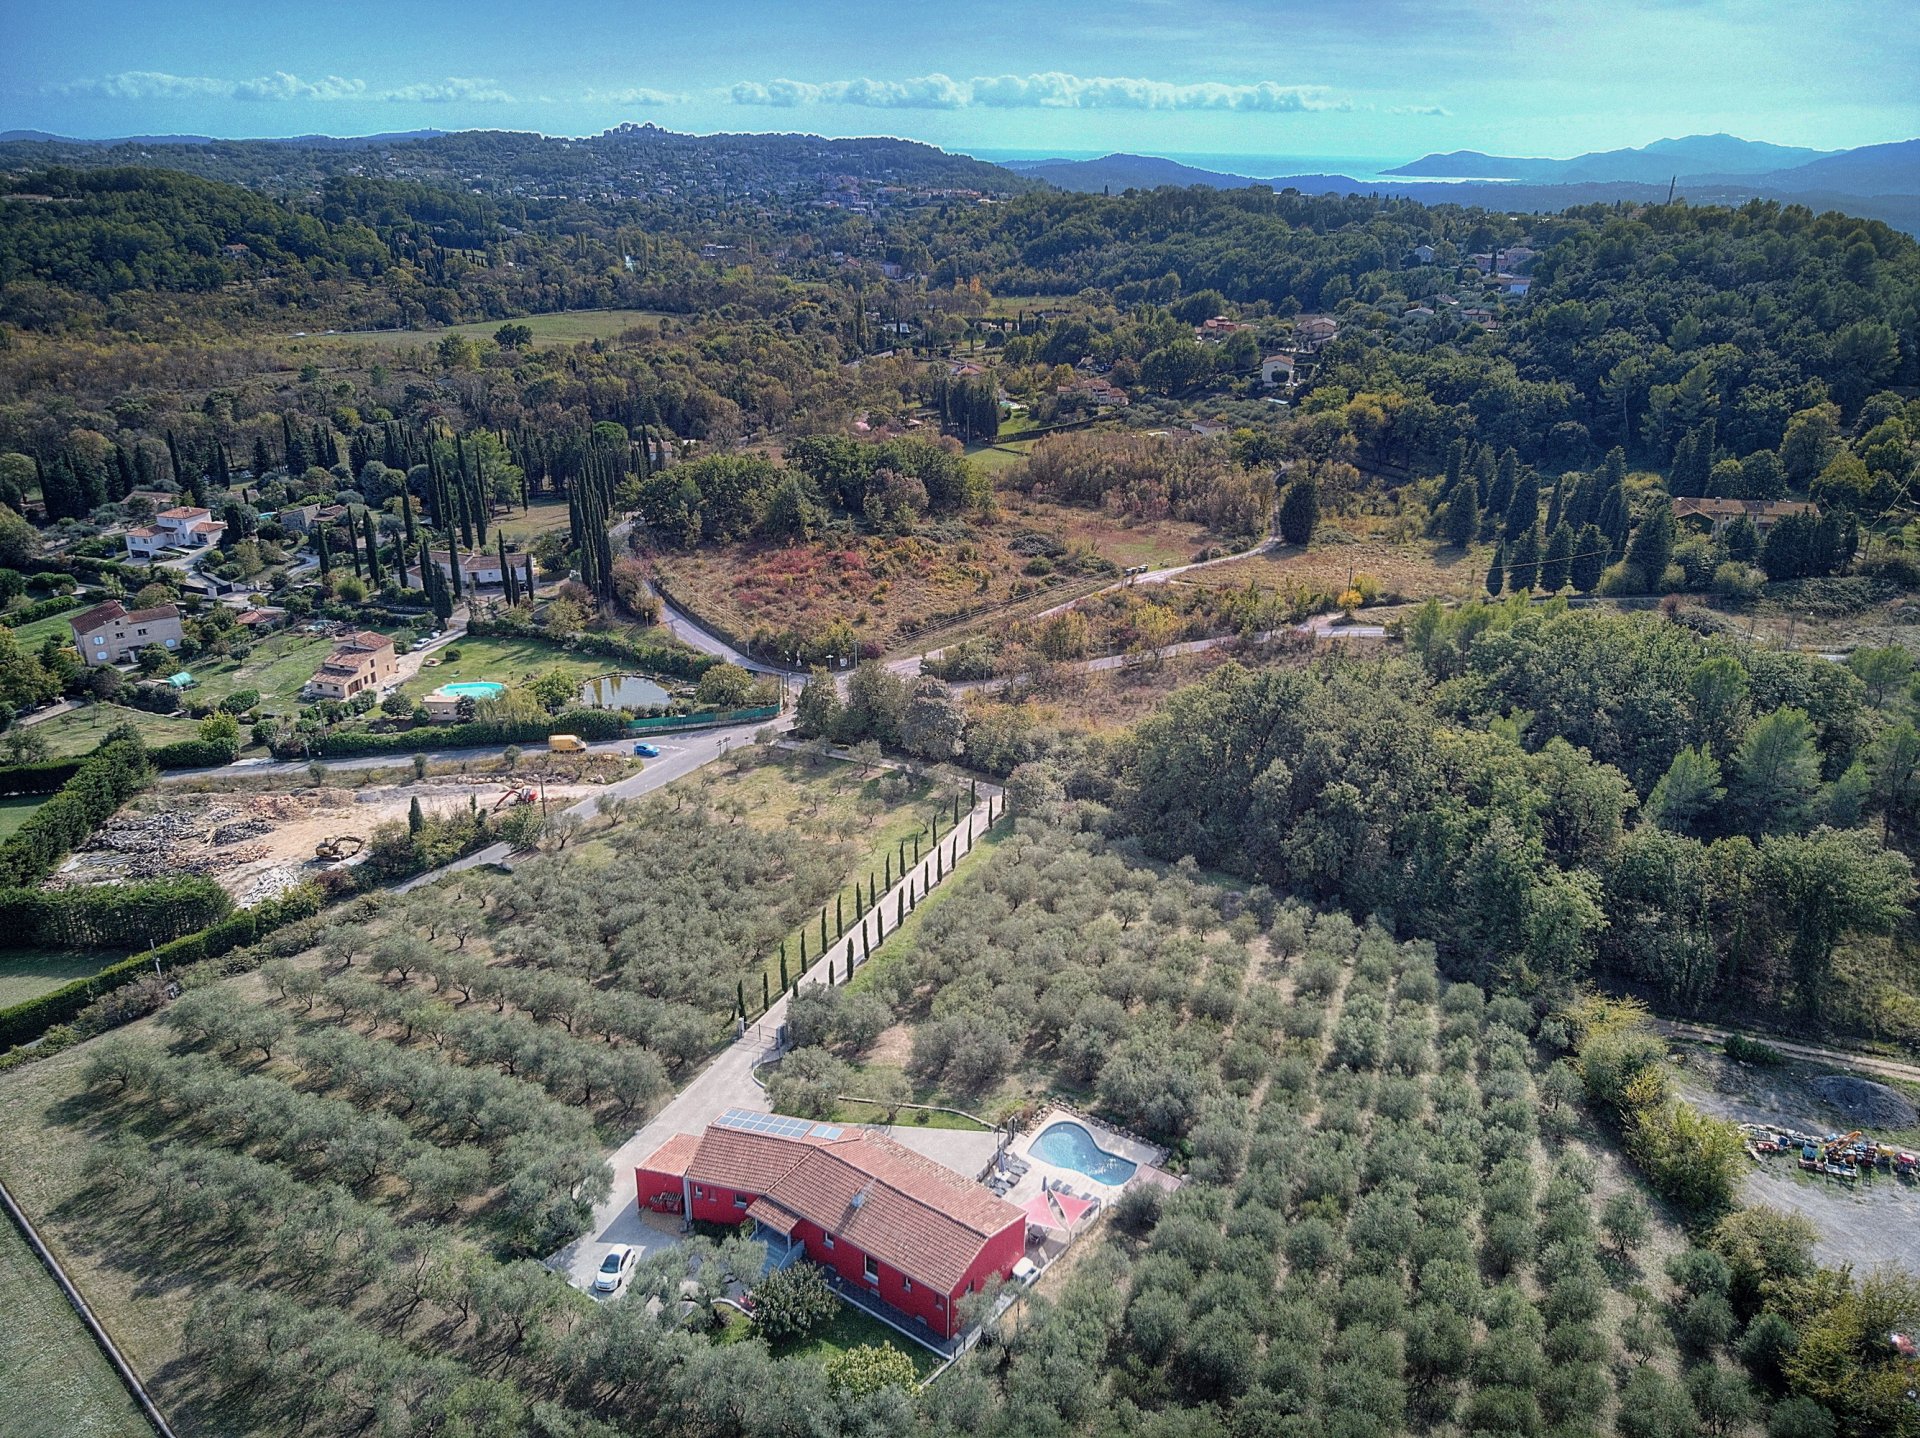 An olive grove with solar panels in Frances